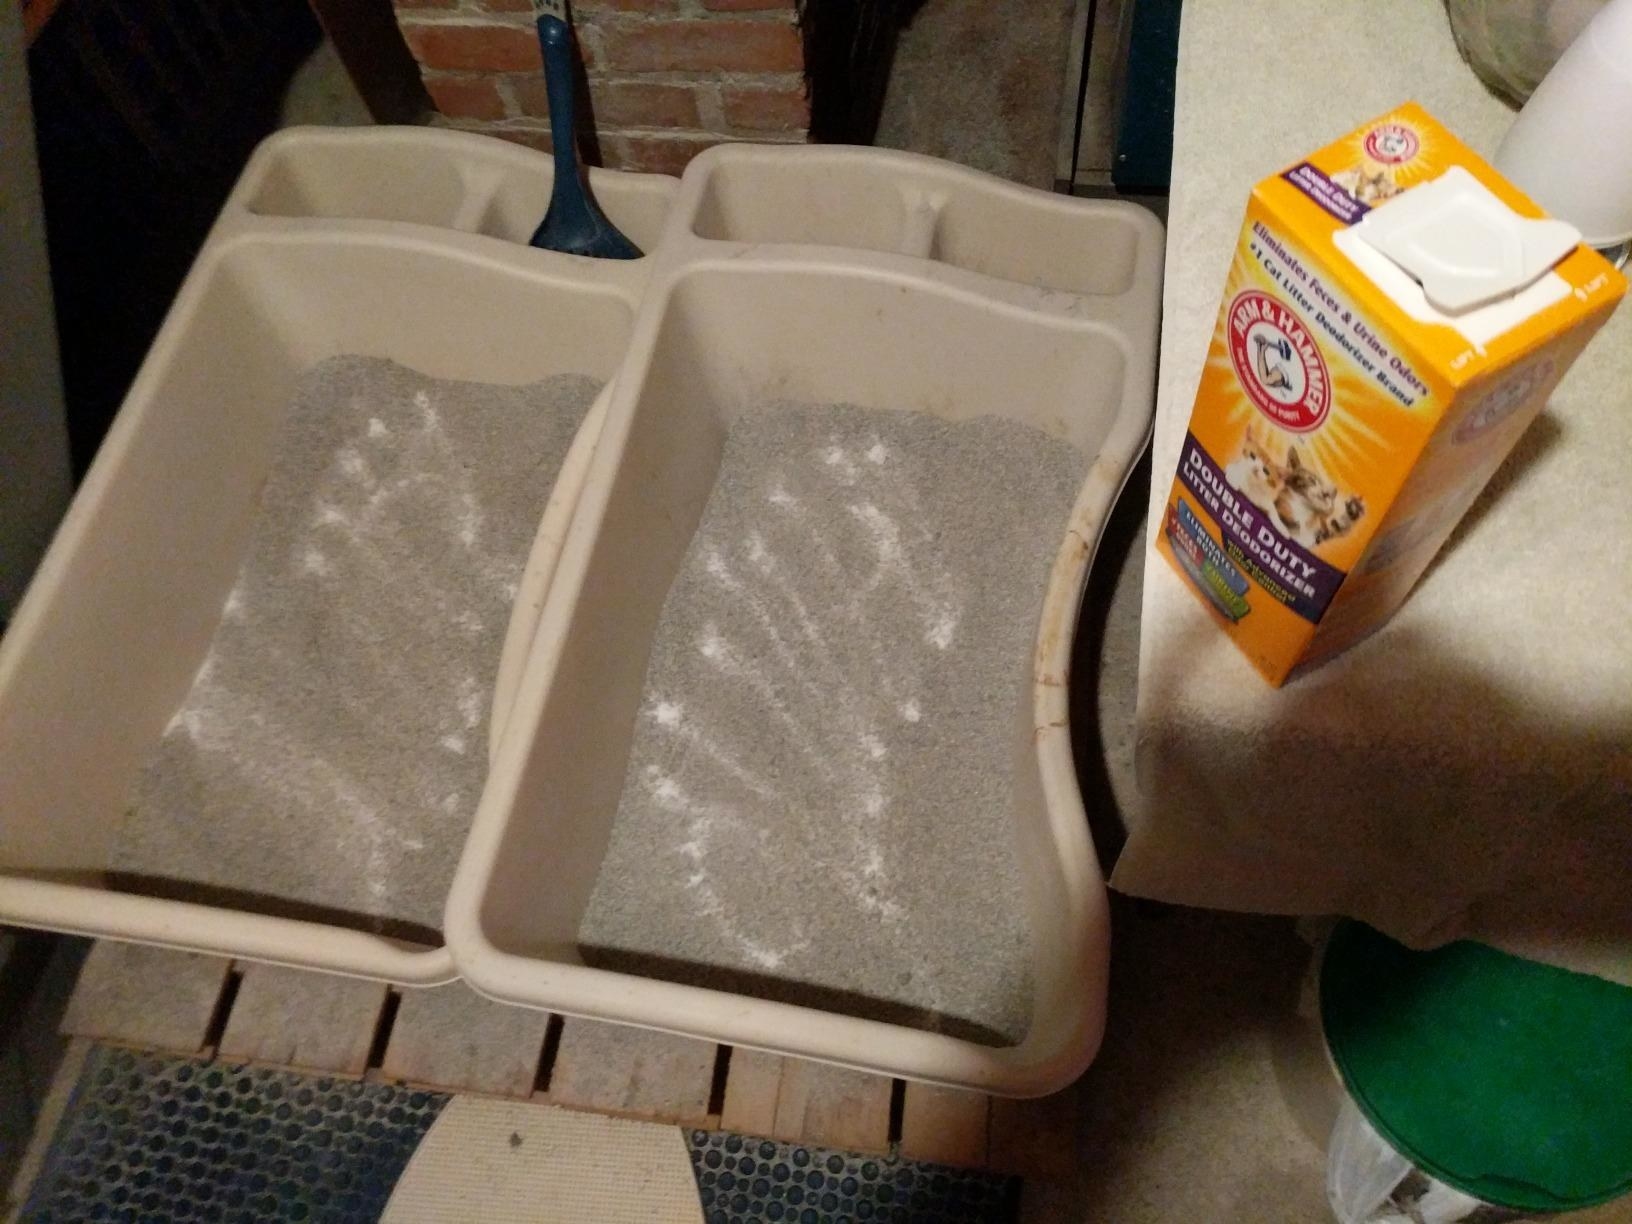 A reviewer photo of the box of powder next to two litter boxes with the powder sprinkled inside